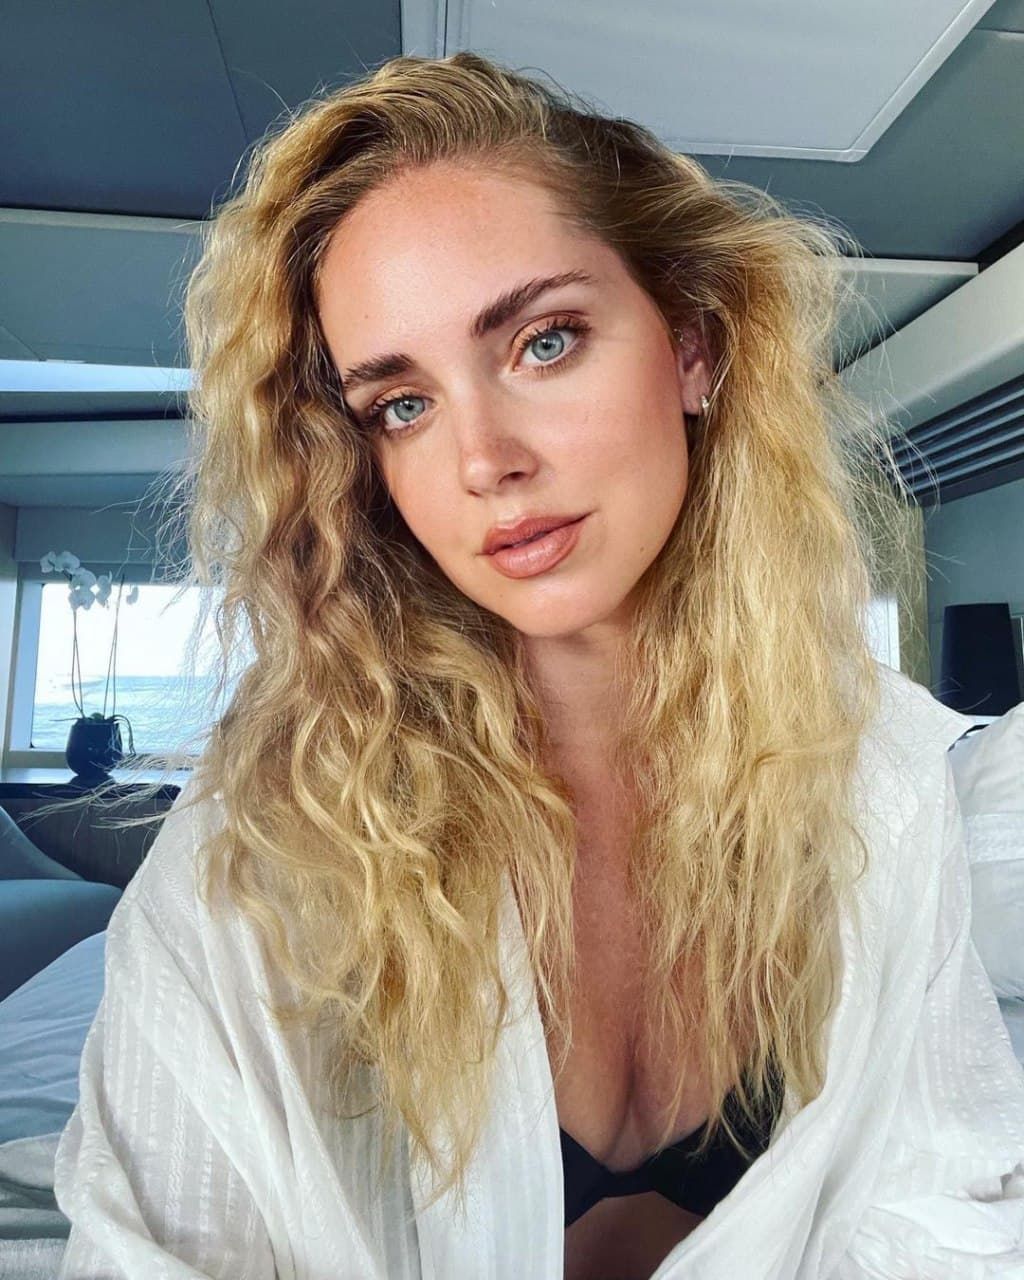 Chiara Ferragni shows herself without makeup on Instagram - Celebrity ...